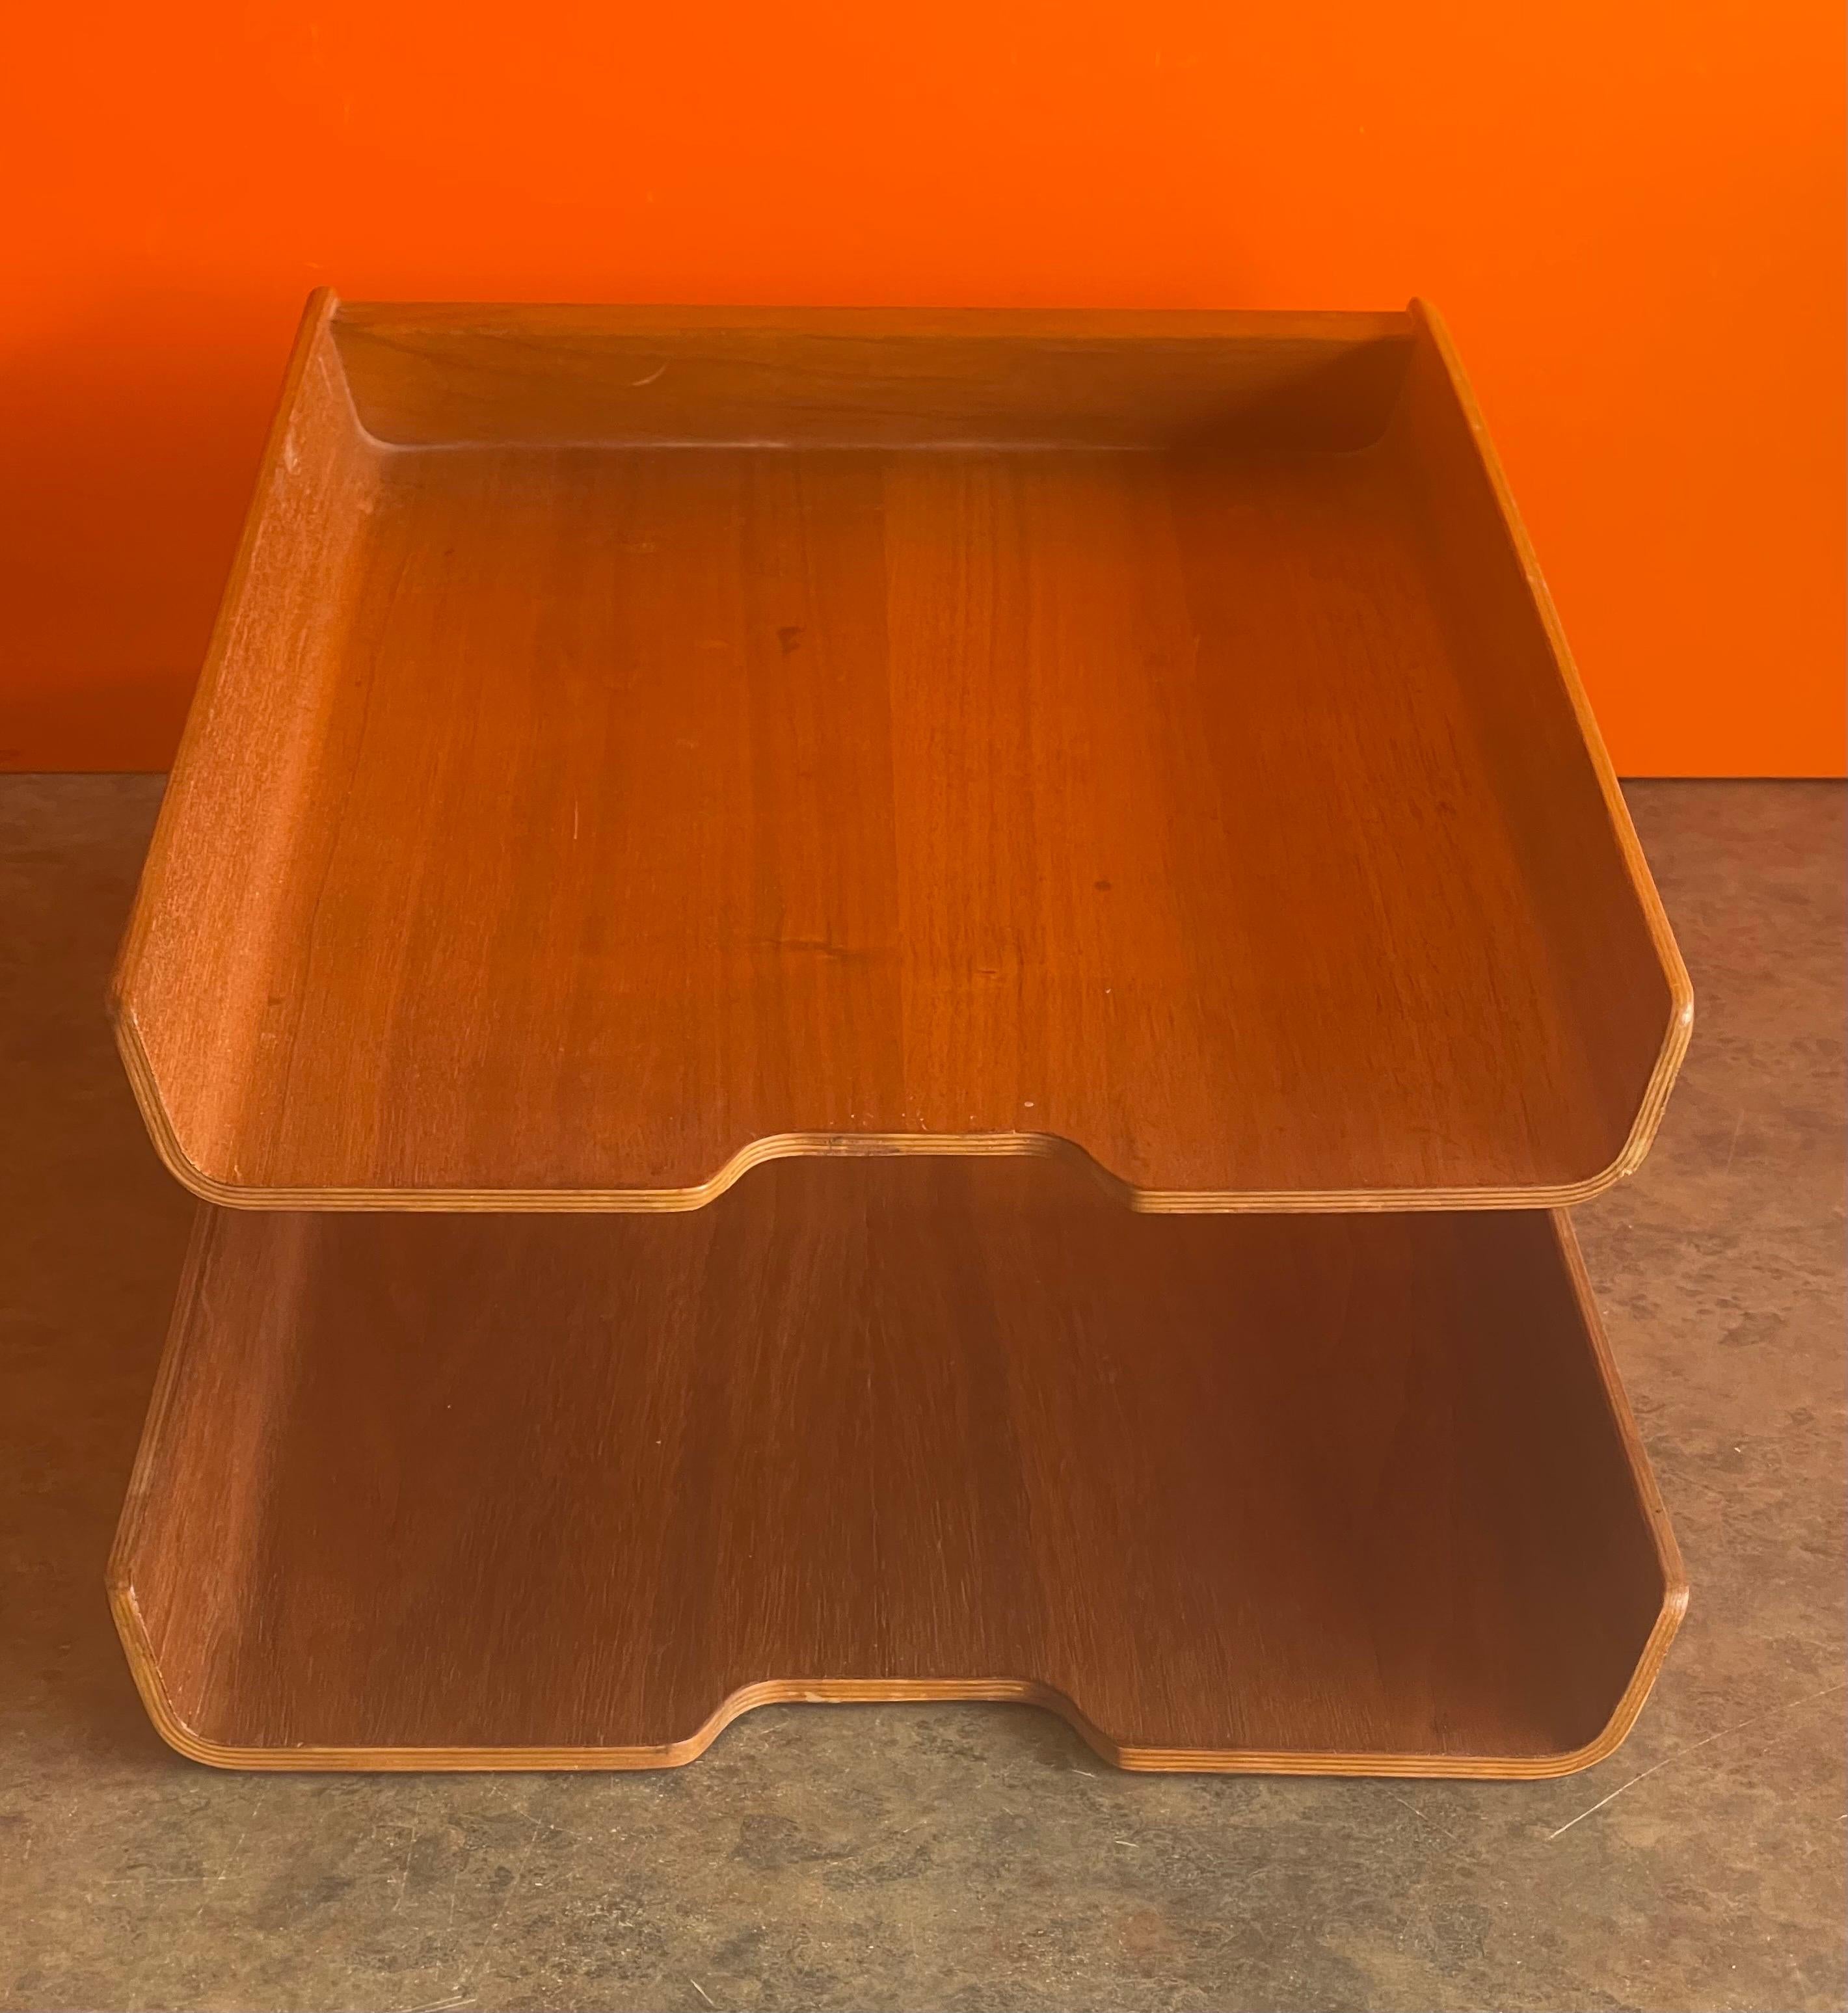 Swedish Molded Teak Plywood Double Letter Tray by Martin Aberg for Rainbow of Sweden For Sale